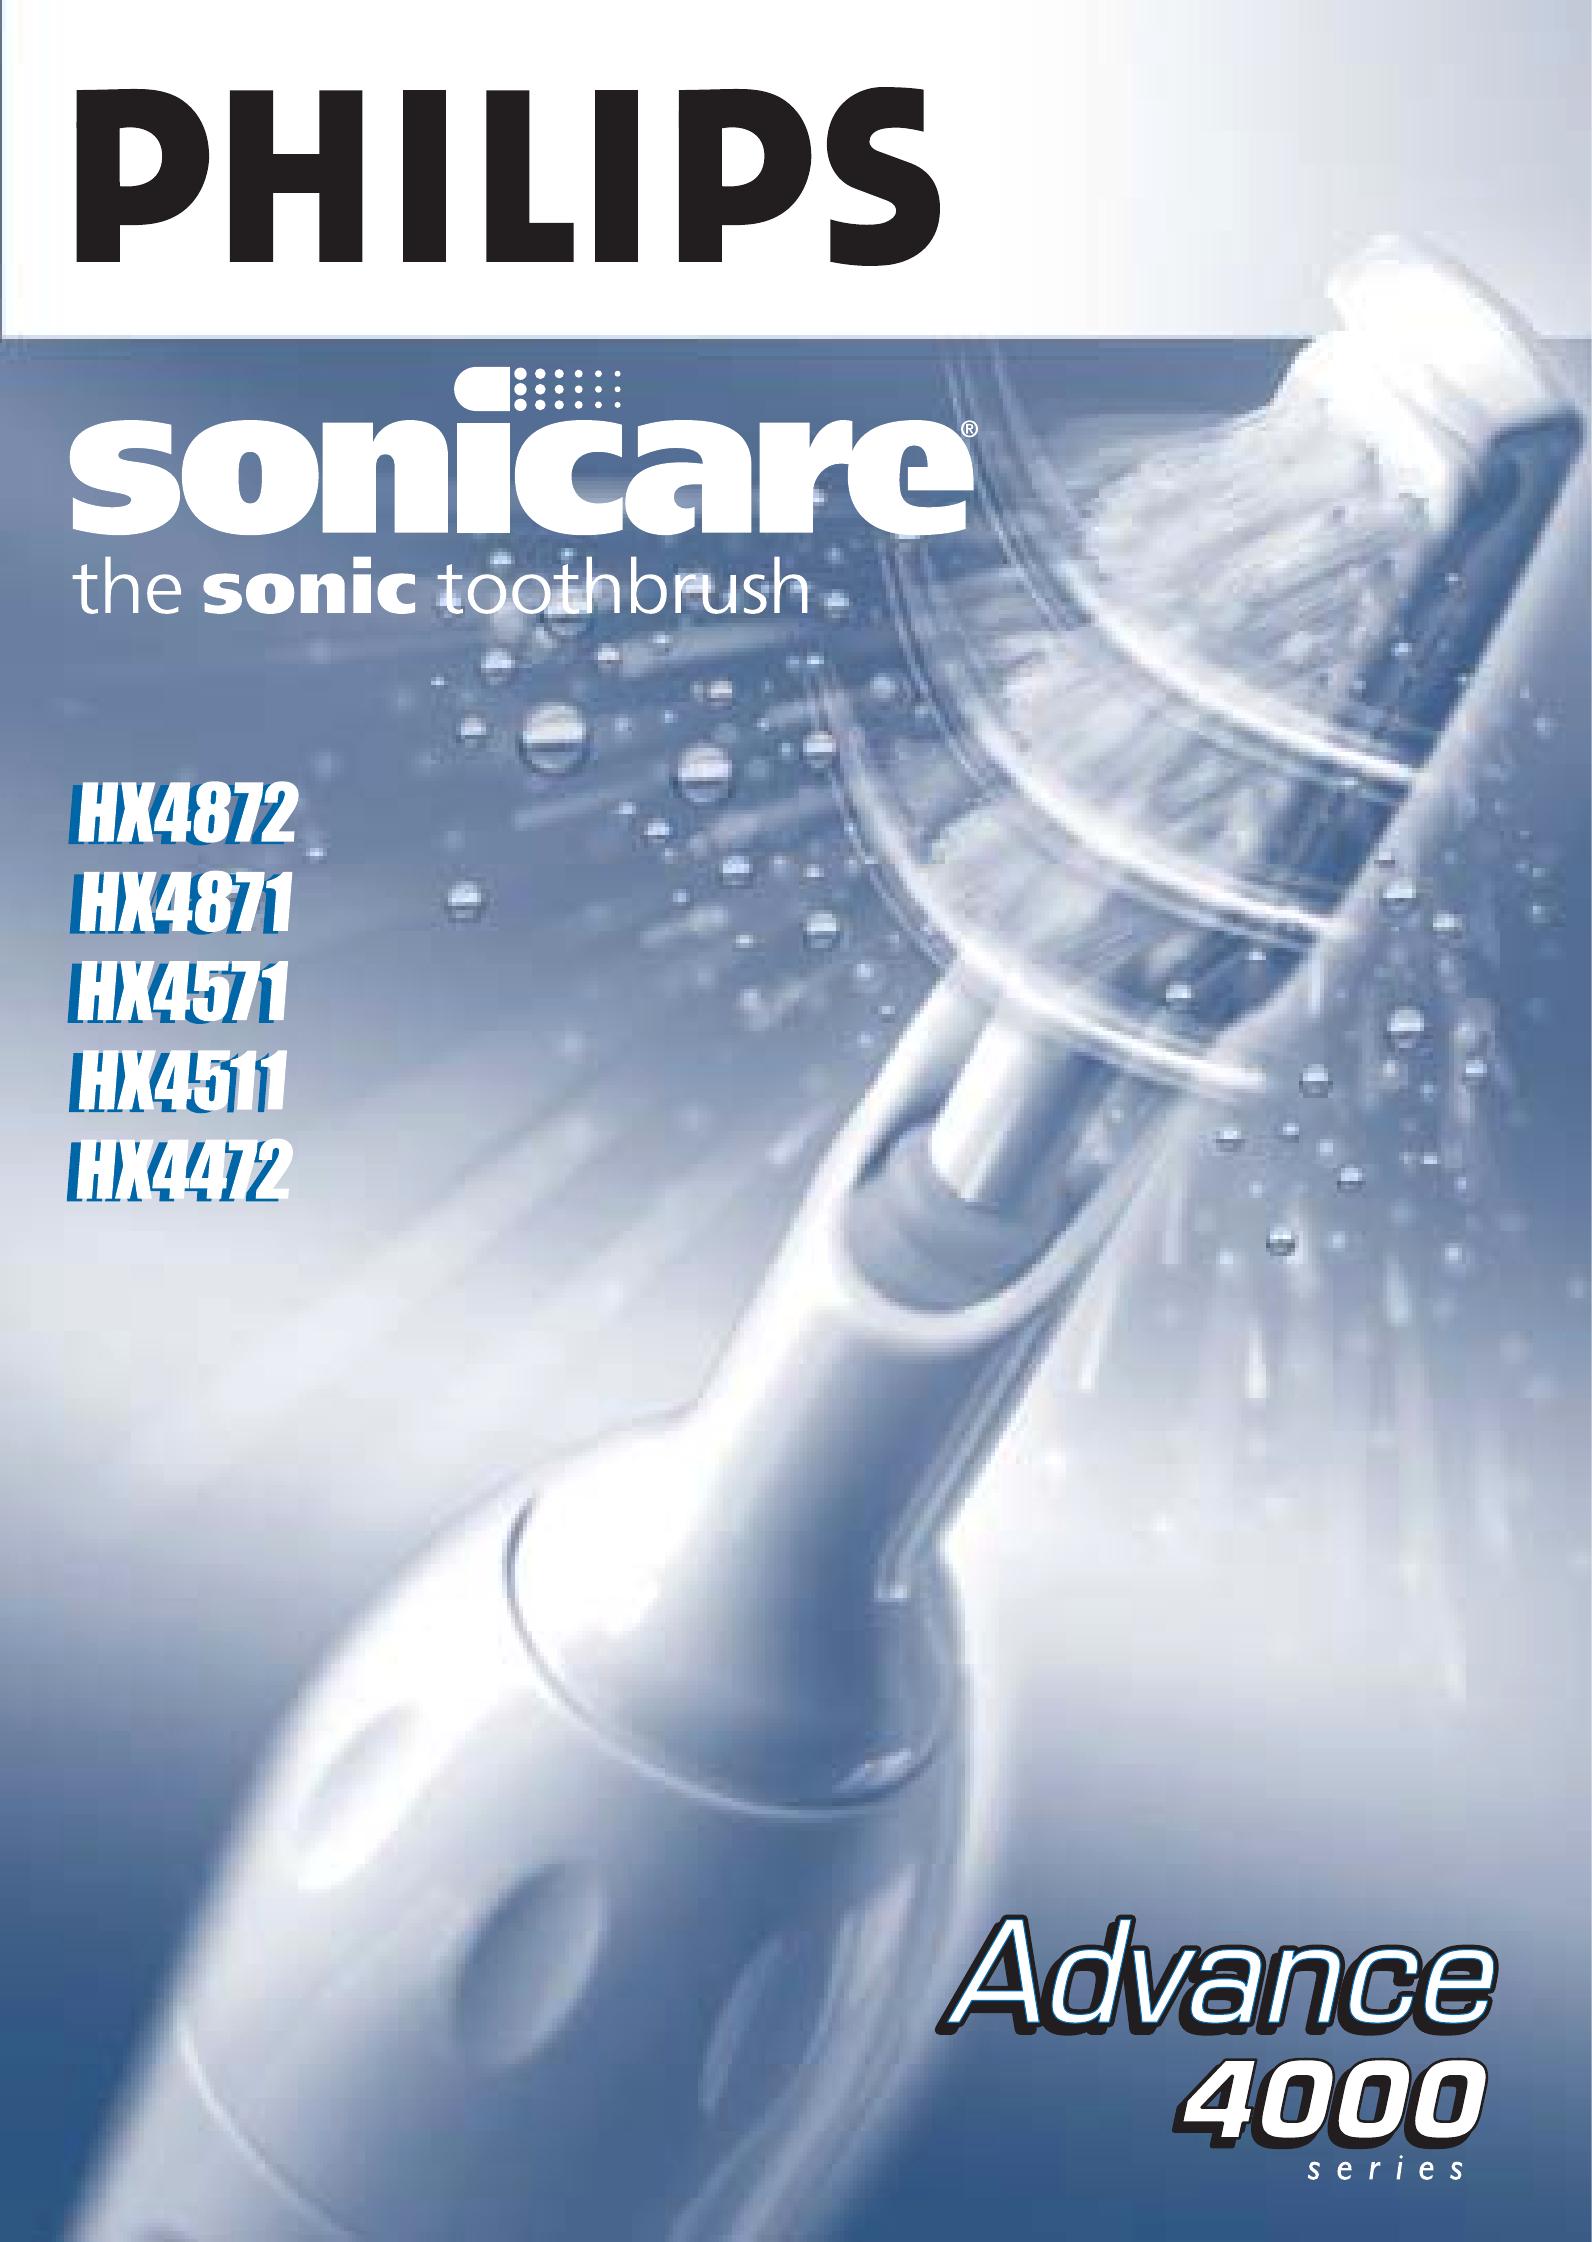 Sonicare HX4472 Electric Toothbrush User Manual